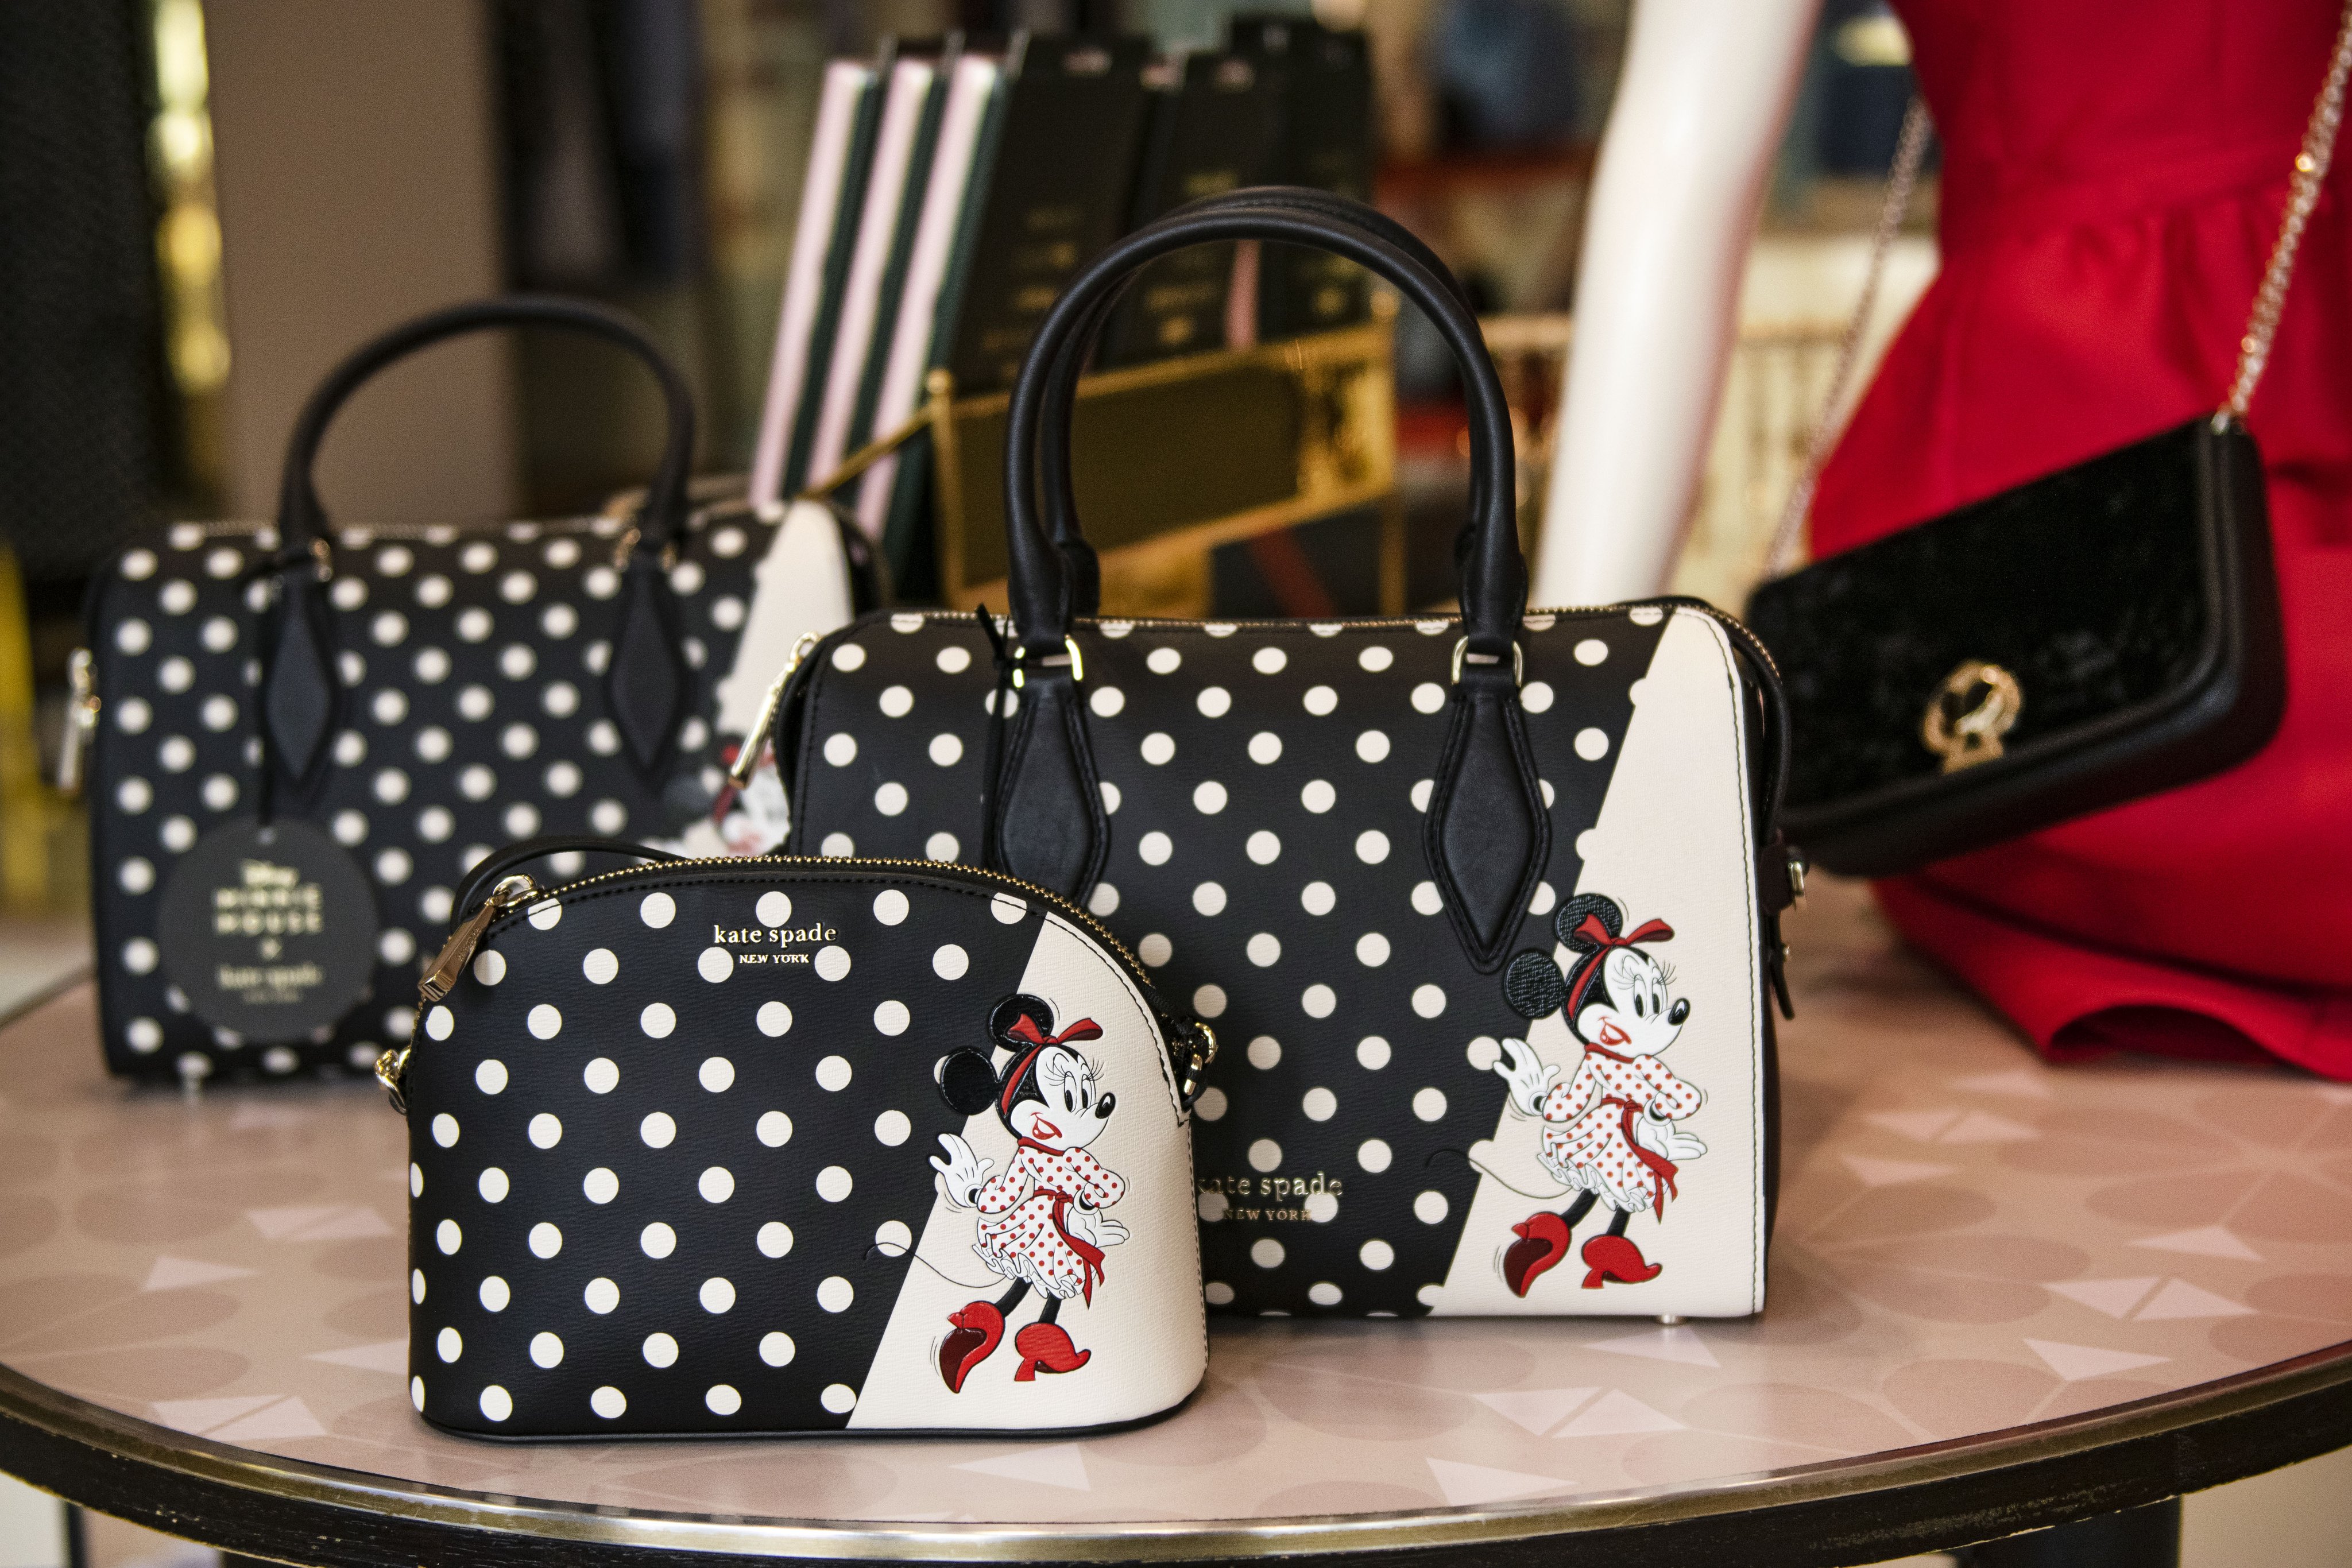 Top 39+ imagen kate spade and minnie mouse - Thptnganamst.edu.vn